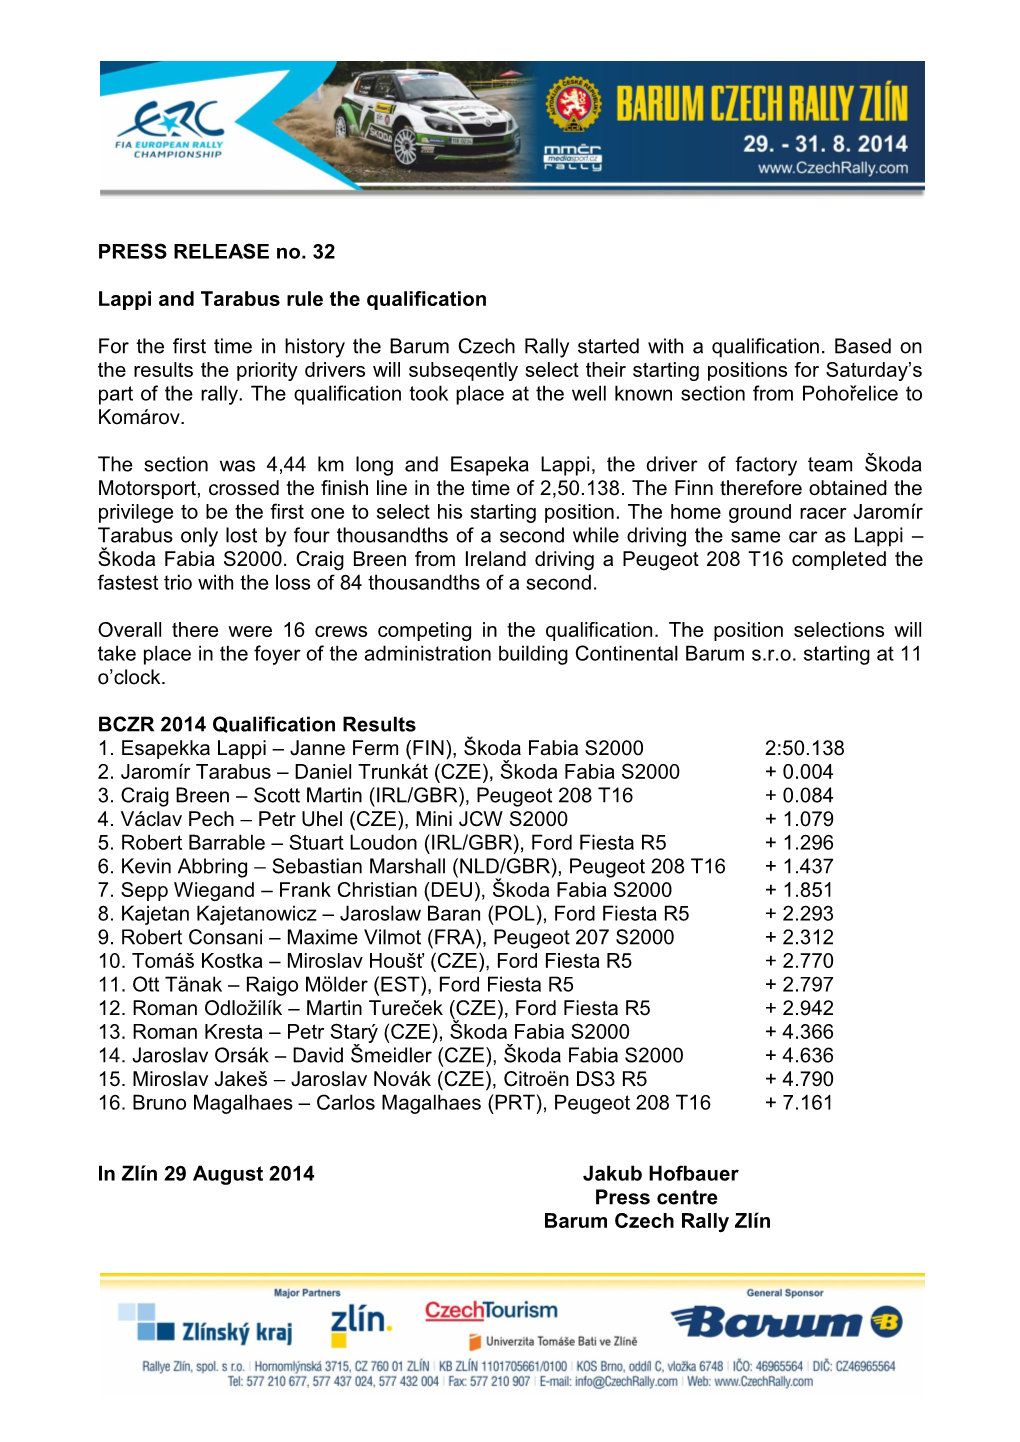 PRESS RELEASE No. 32 Lappi and Tarabus Rule the Qualification For